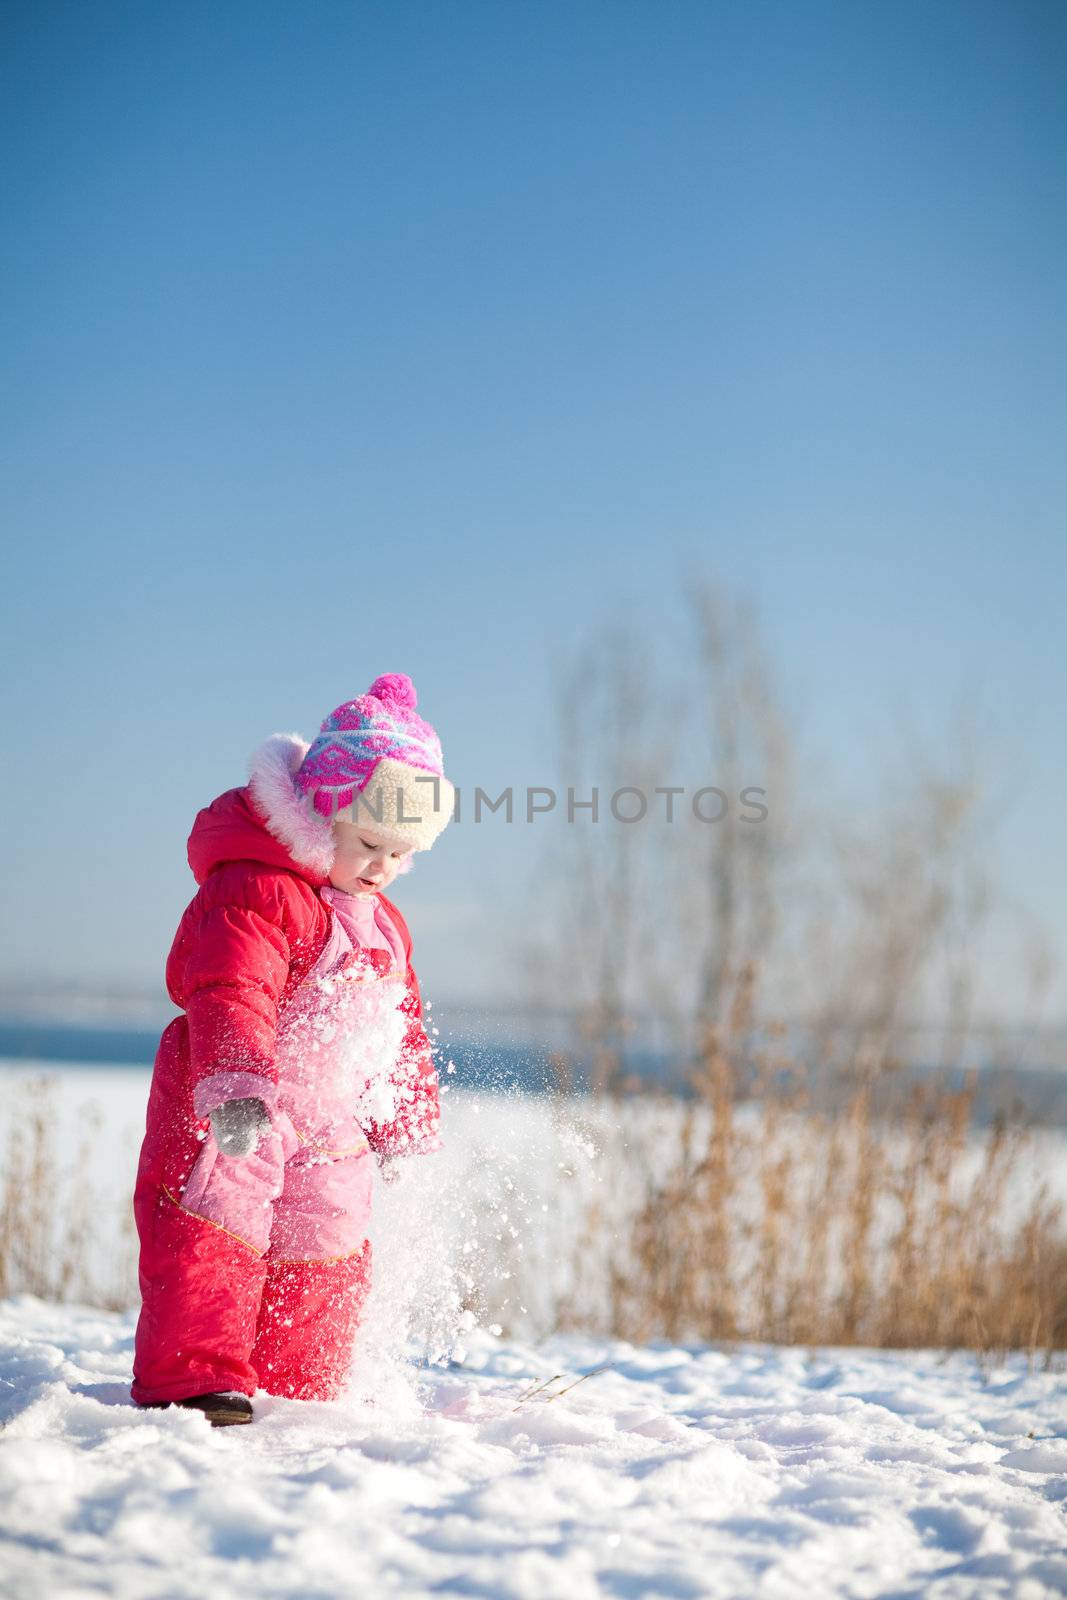 small child playing in winter